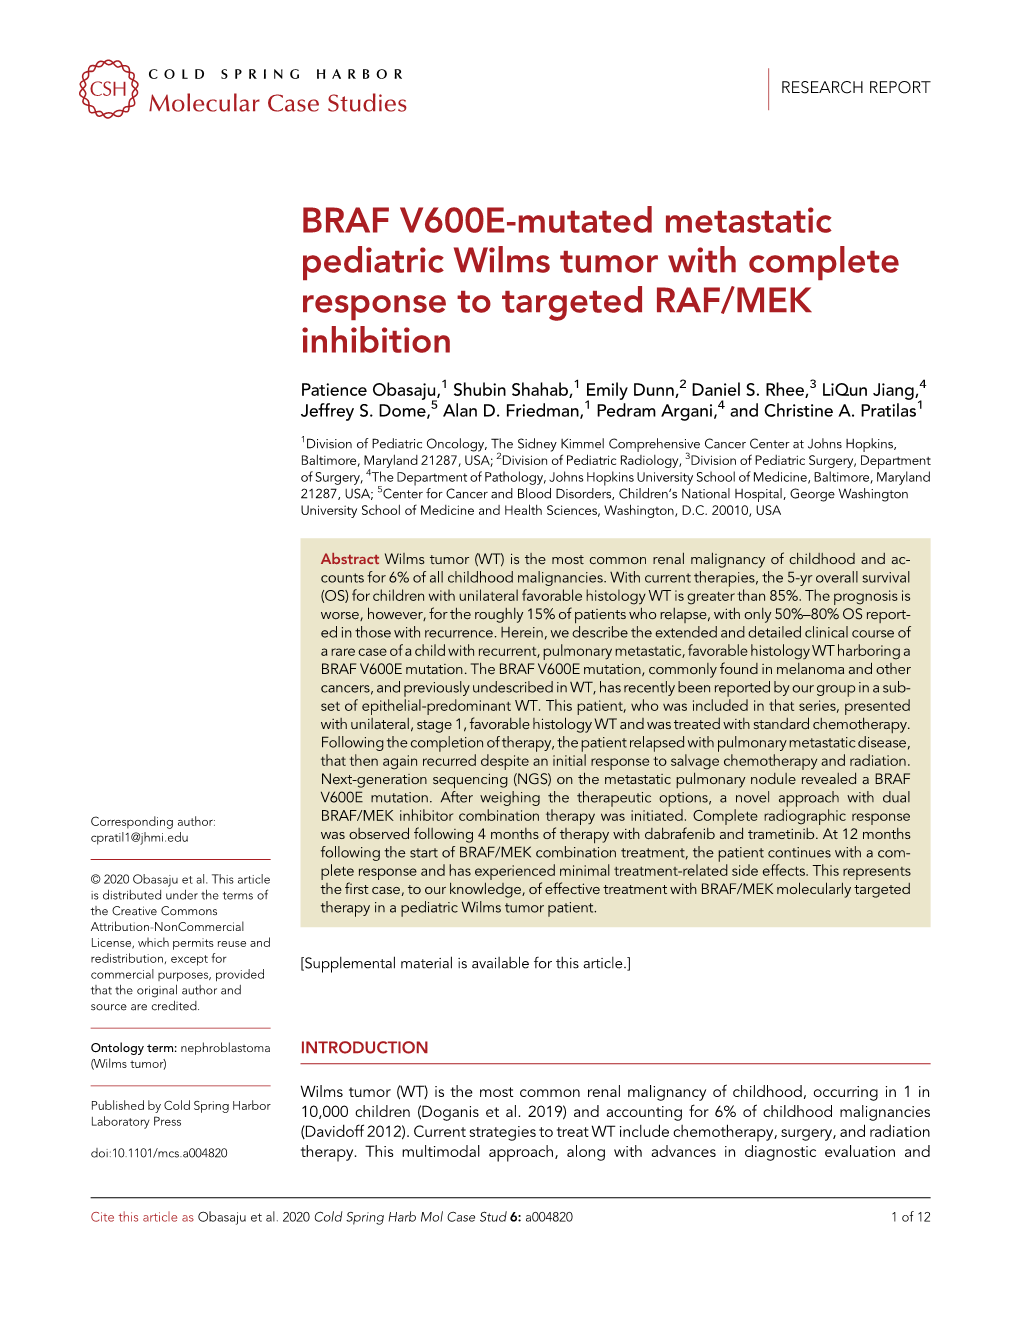 BRAF V600E-Mutated Metastatic Pediatric Wilms Tumor with Complete Response to Targeted RAF/MEK Inhibition